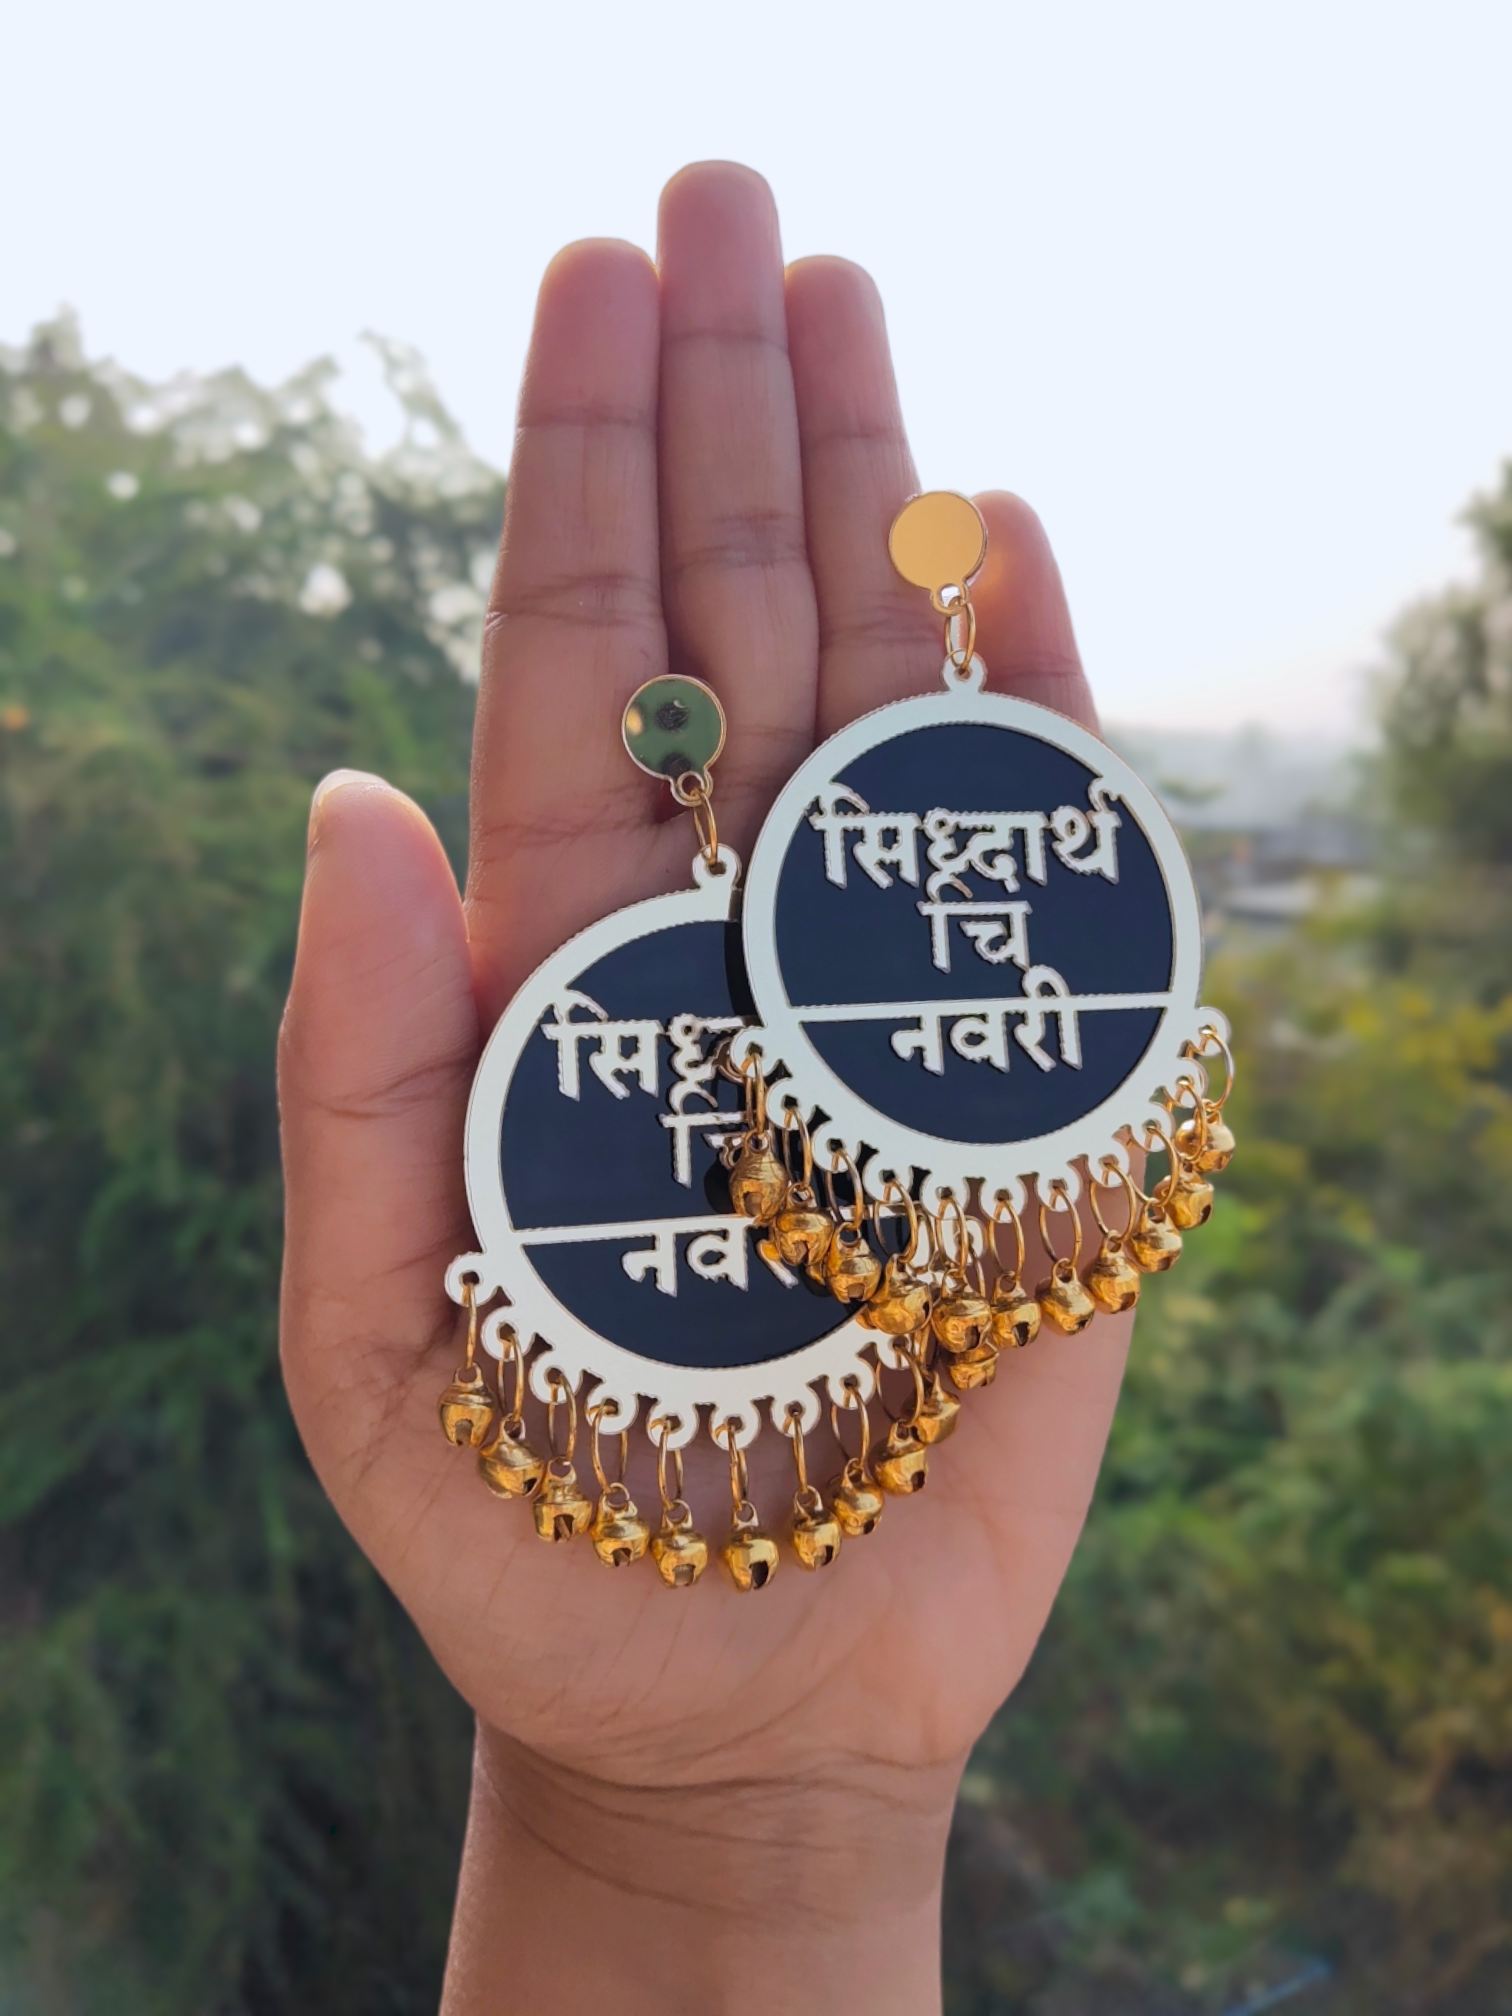 Sophisticated black Dulhaniya earrings adorned with intricate designs and personalized text in Hindi and Marathi, exemplifying exquisite craftsmanship and cultural allure.